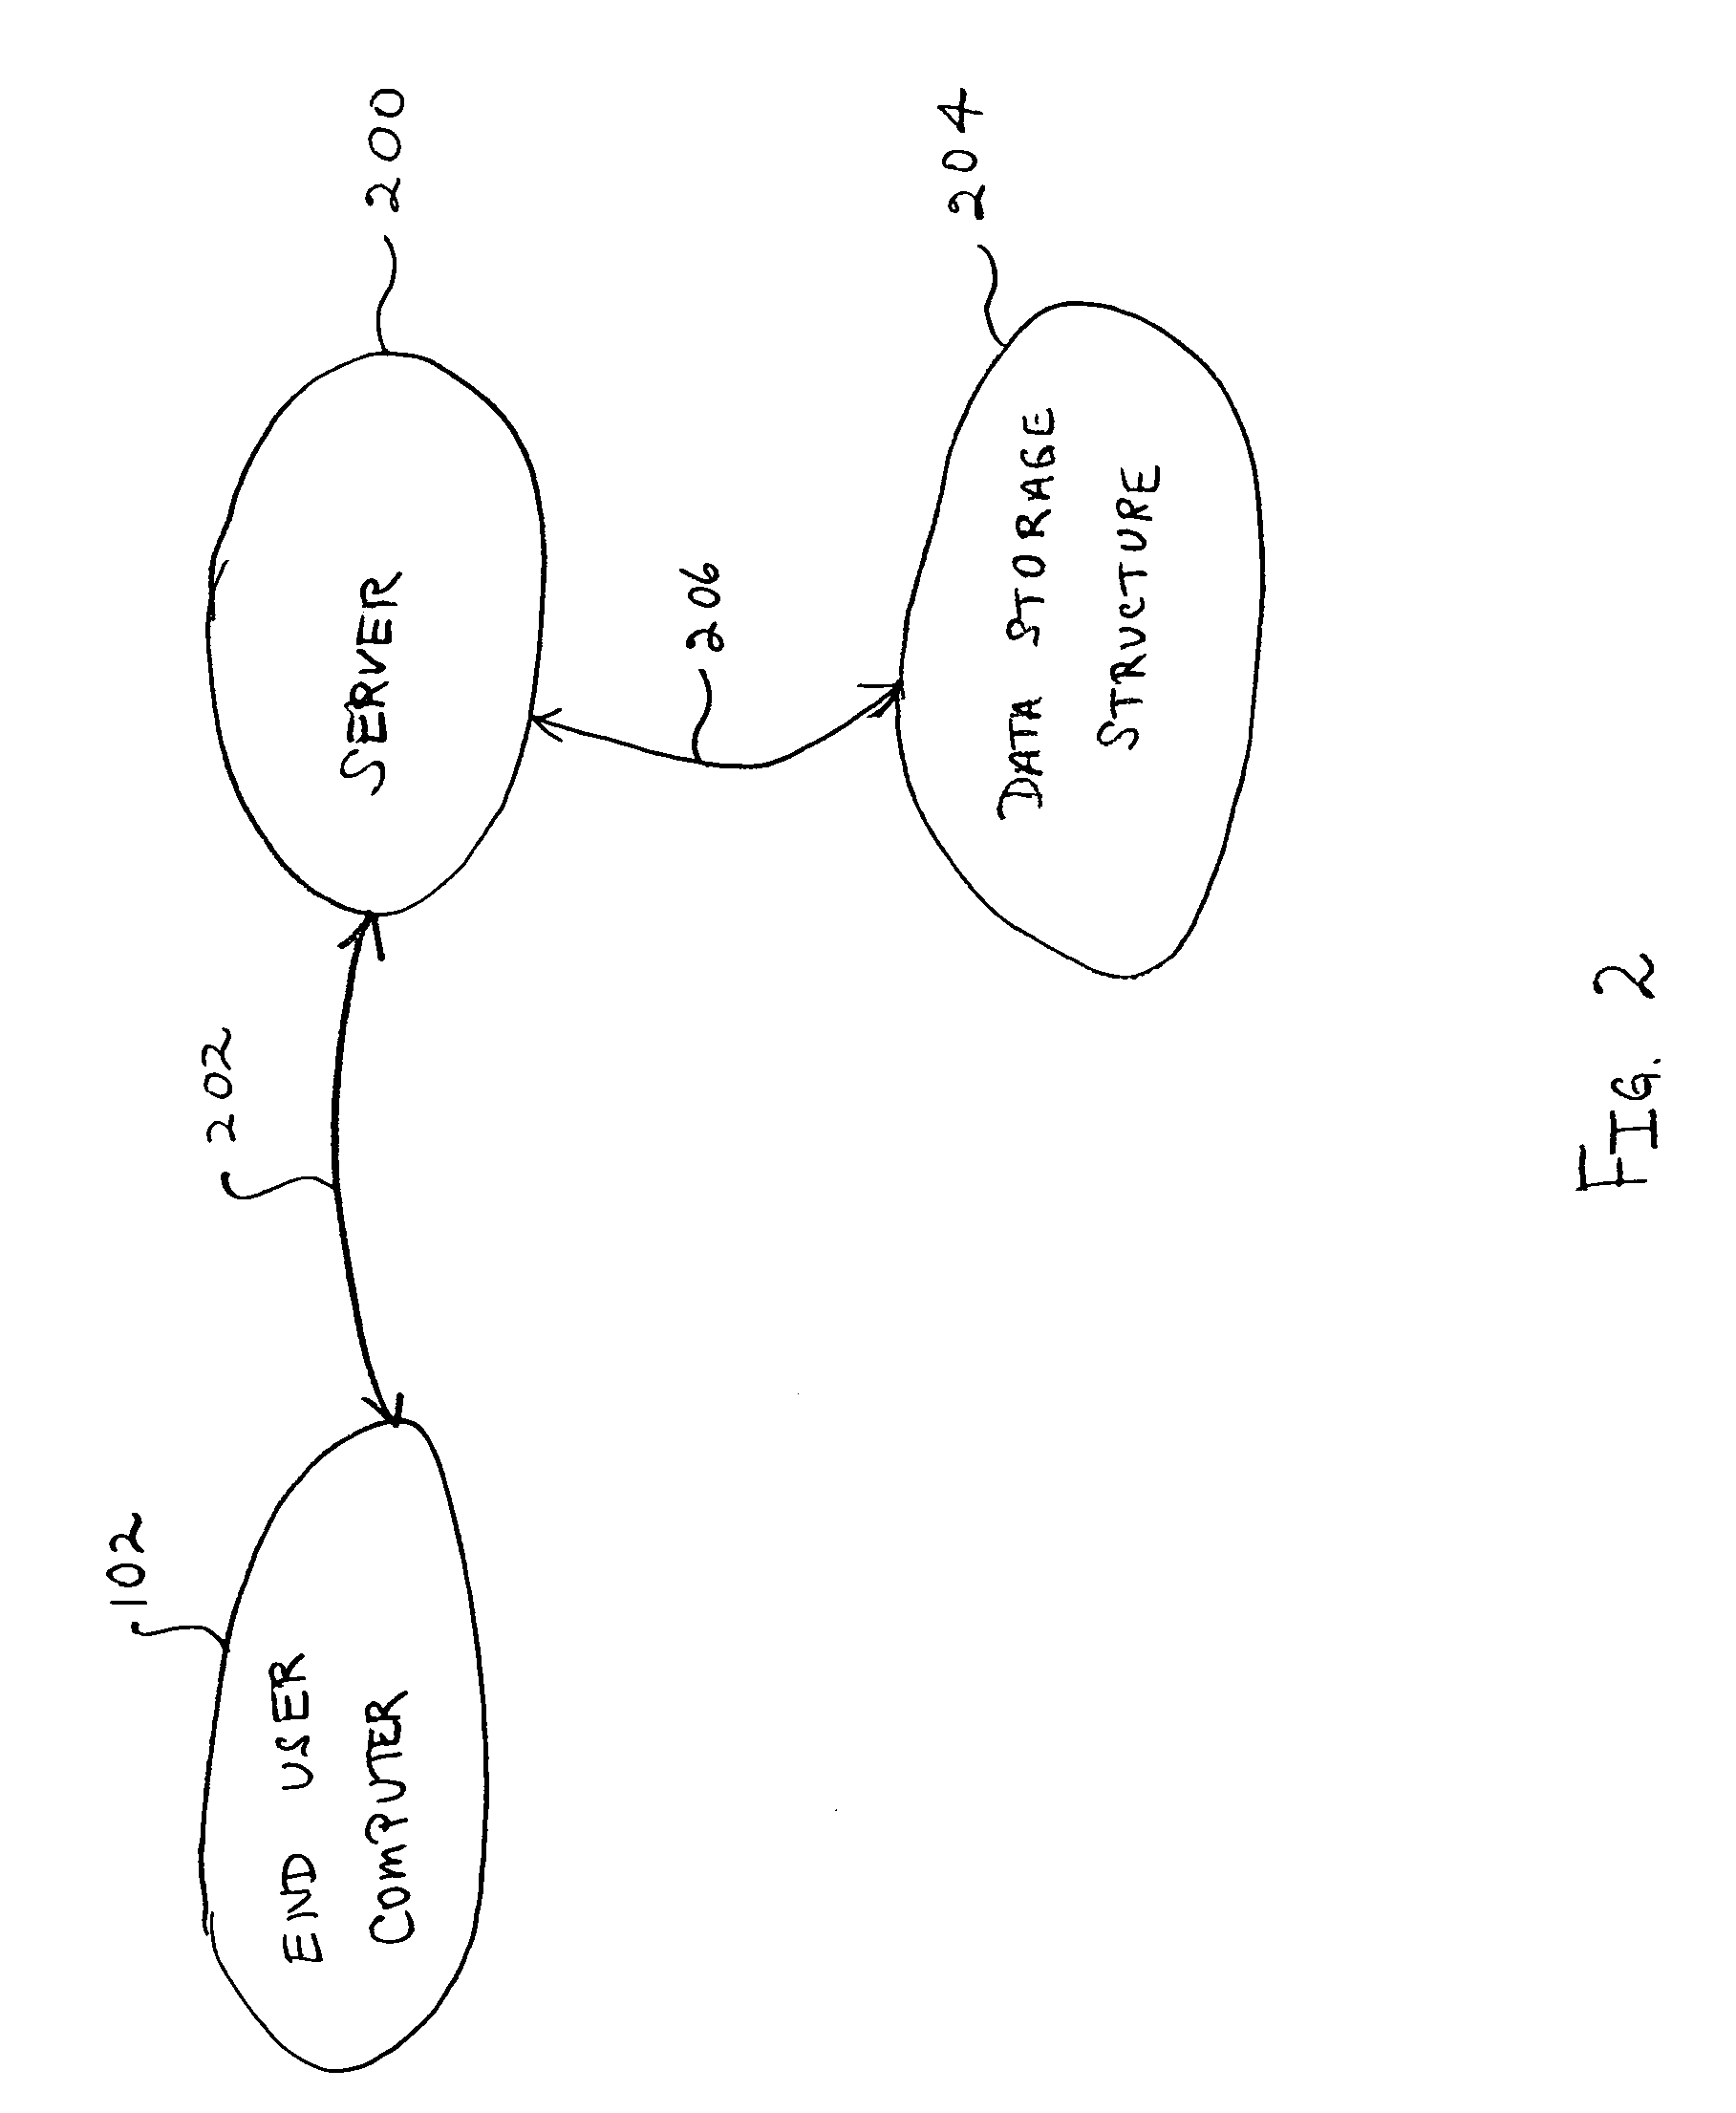 System and method for selectively classifying a population